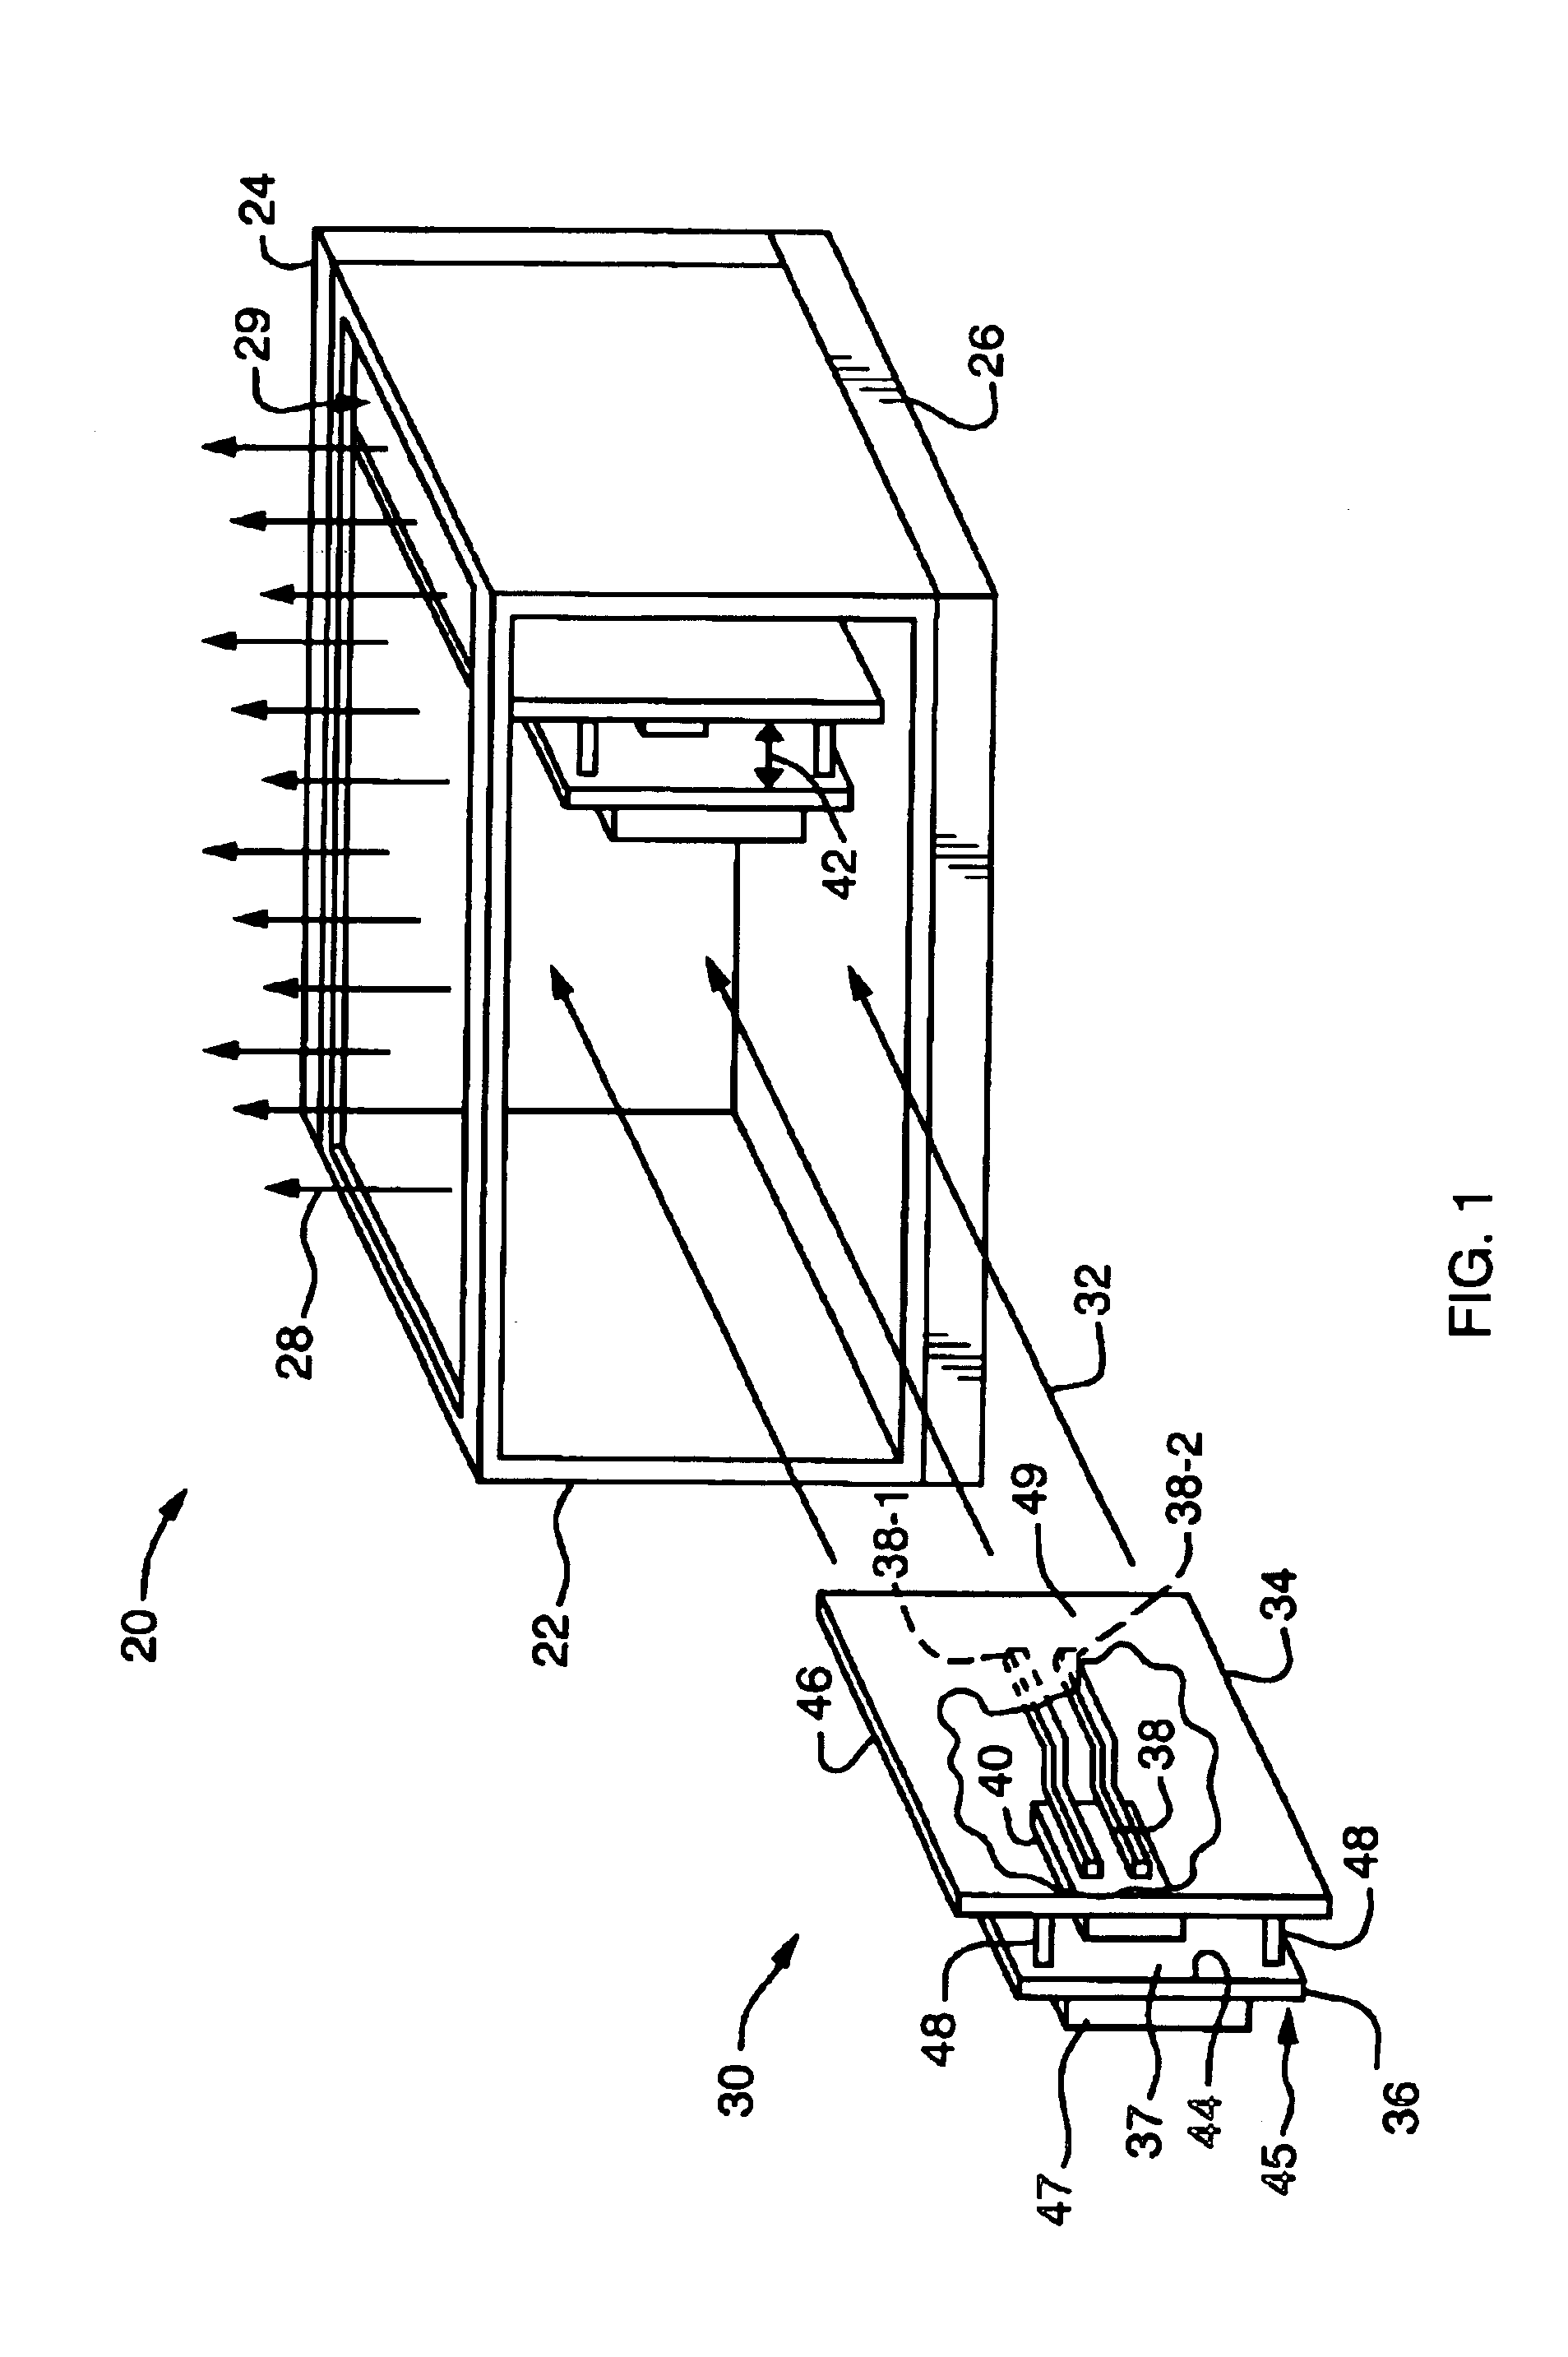 Methods and apparatus for cooling a circuit board component using a heat pipe assembly